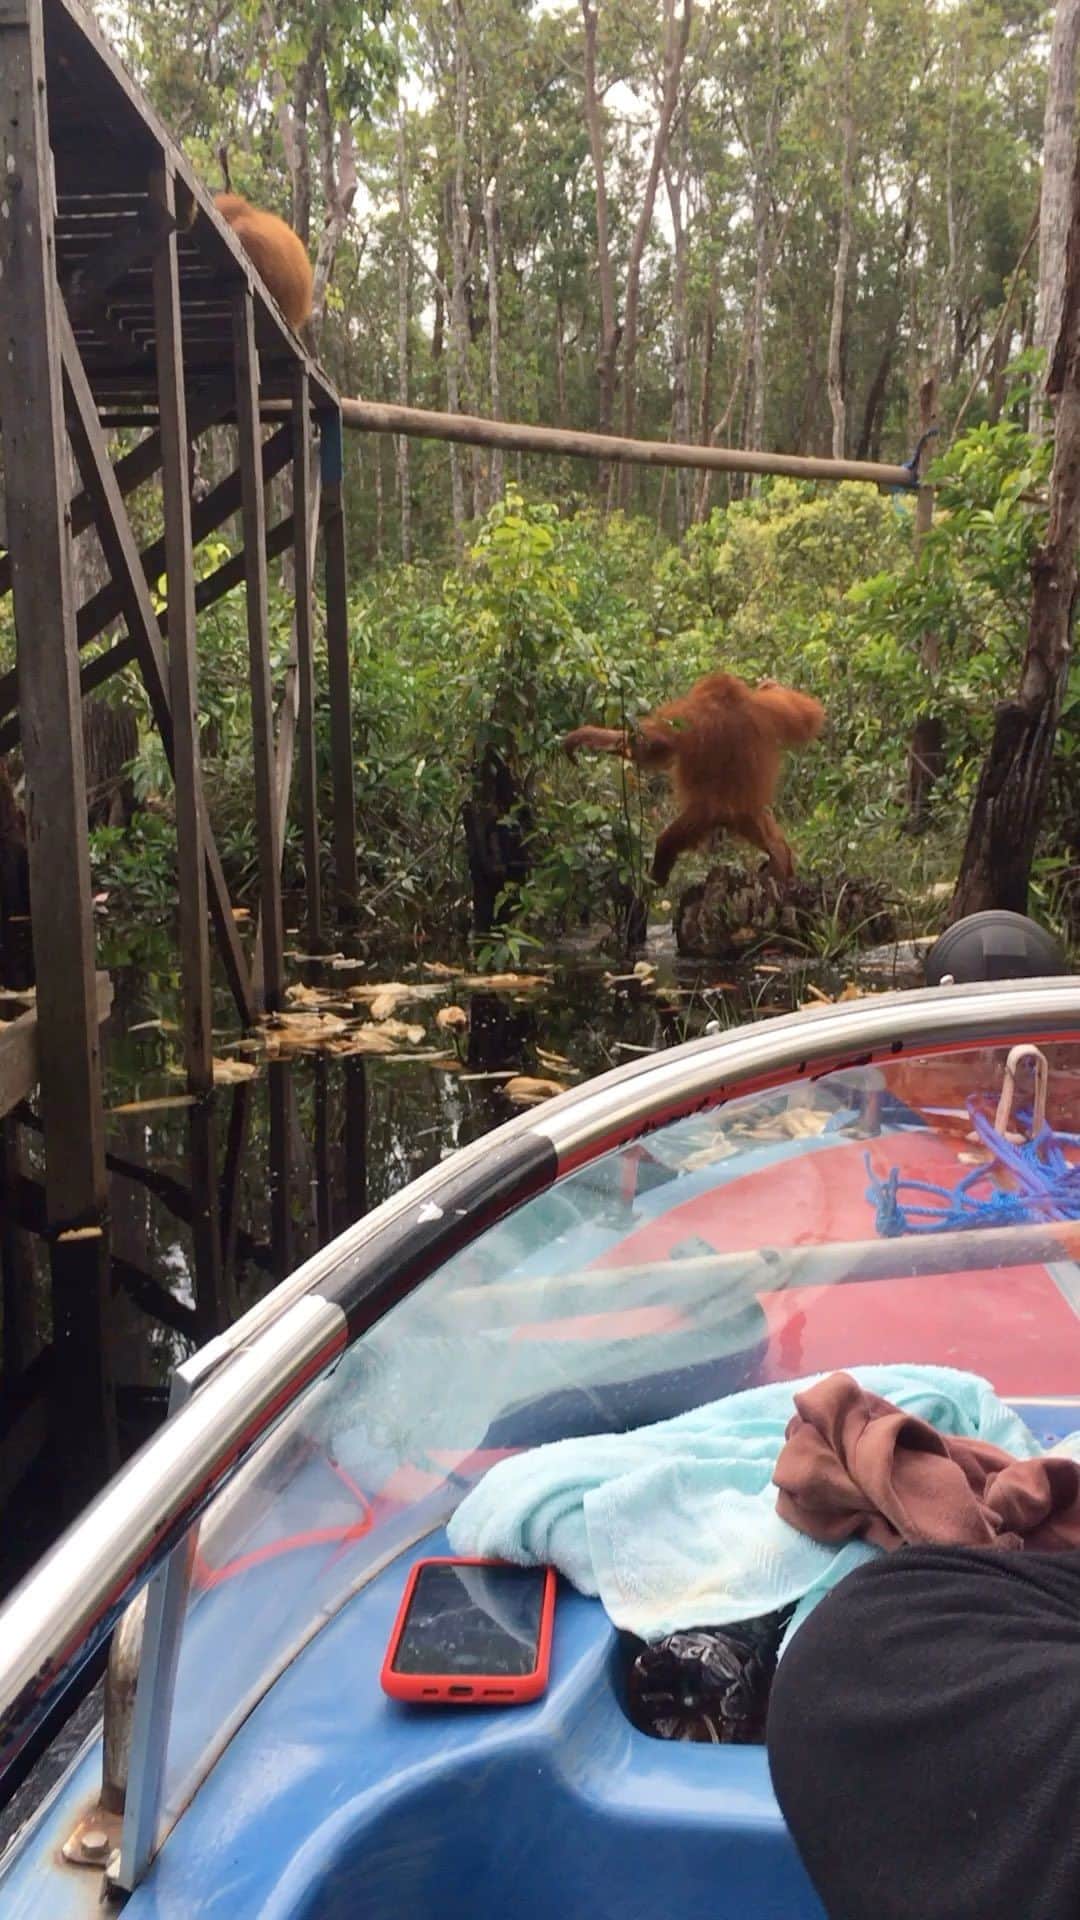 OFI Australiaのインスタグラム：「Deep in the Borneo forest at a private Orangutan Foundation International feeding station in Tanjung Puting National Park. One of OFI’s 14 release sites for rescued and rehabilitated orangutans. #saveorangutans #saynotopalmoil #tanjungputingnationalpark #orangutanrehabilitation #orangutanfoundationinternational #ofi」